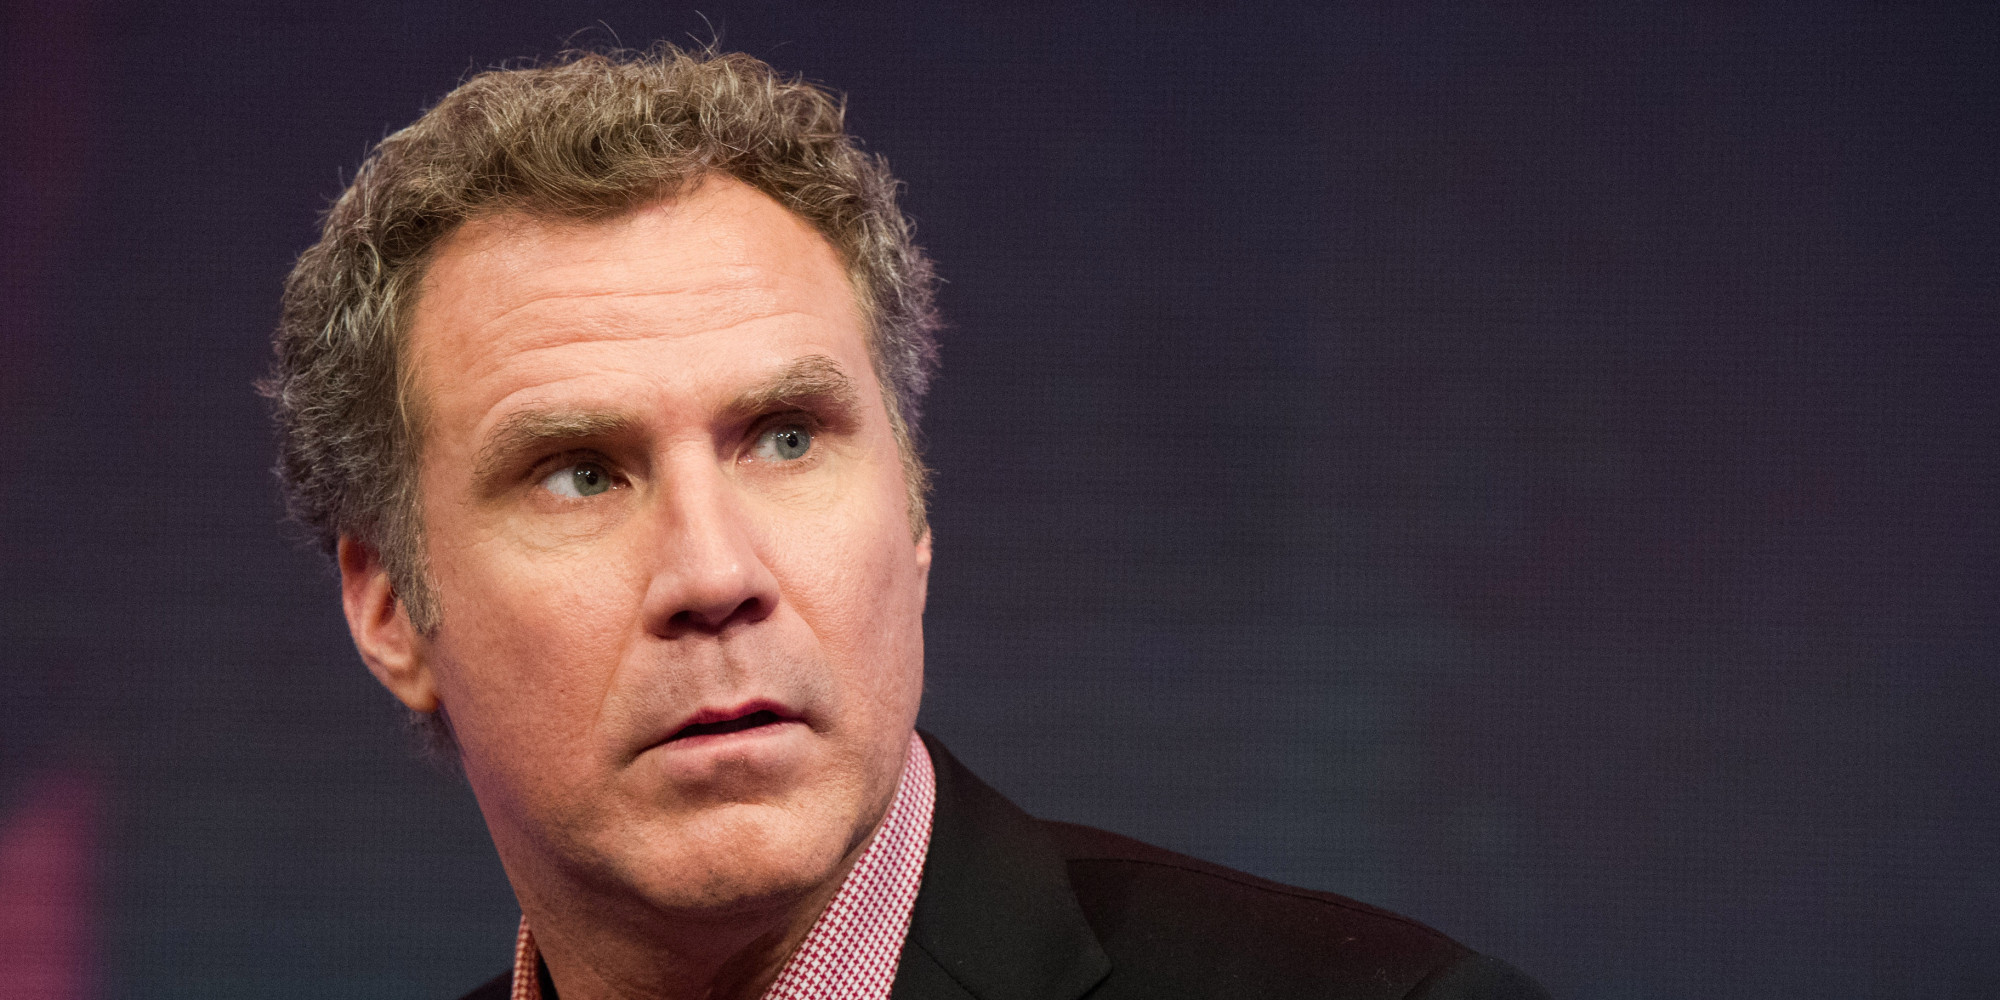 Will Ferrell appears on BET's "106 & Park" on Tuesday, Dec. 17, 2013 in New York. (Photo by Charles Sykes/Invision/AP)